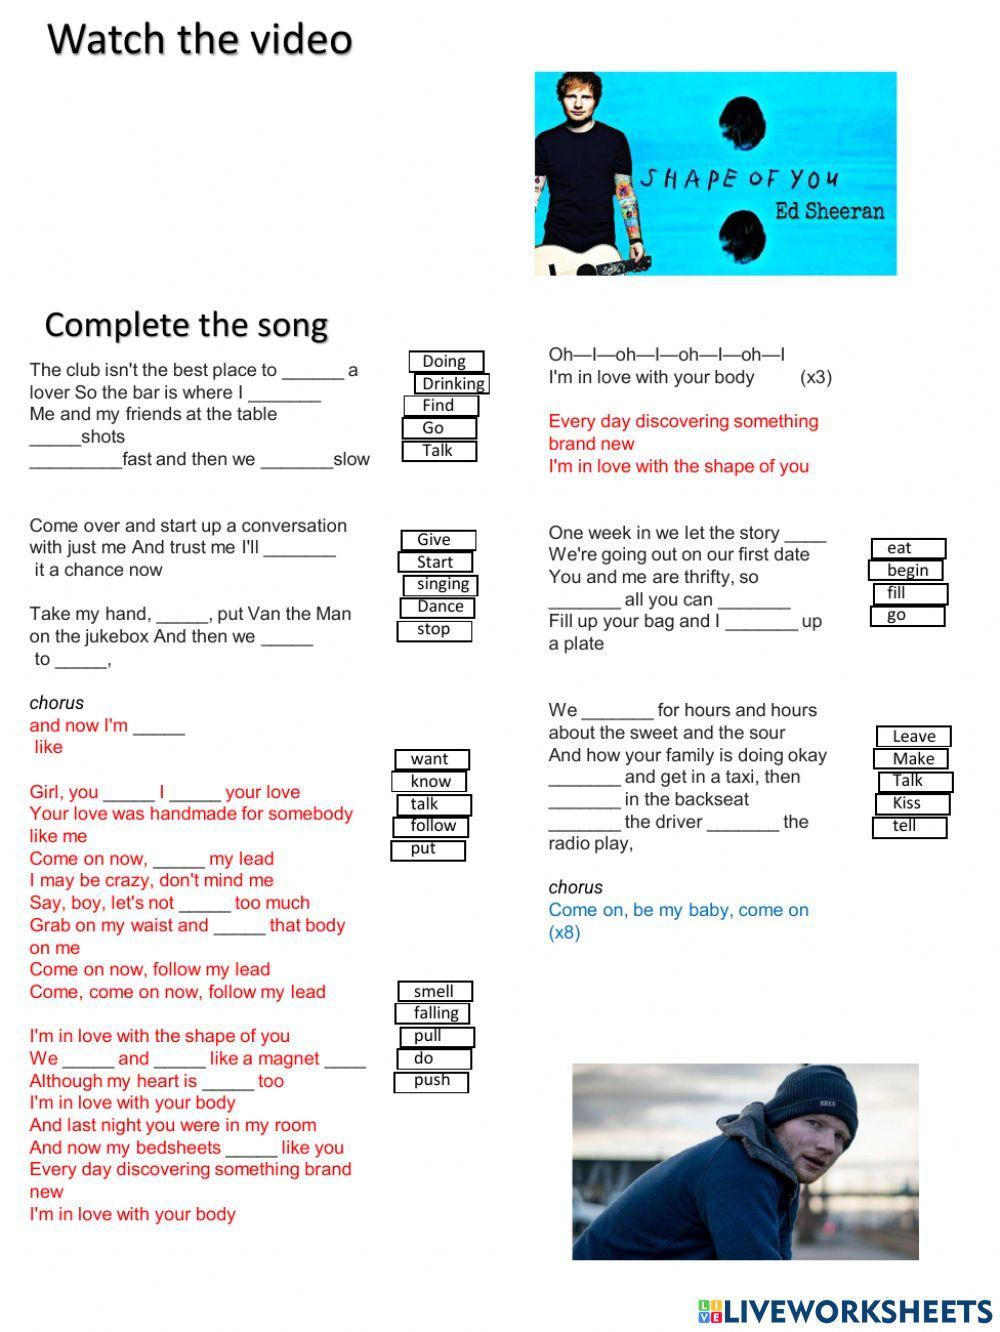 Listening Ed Sheeran - Shape of You, complete with verbs